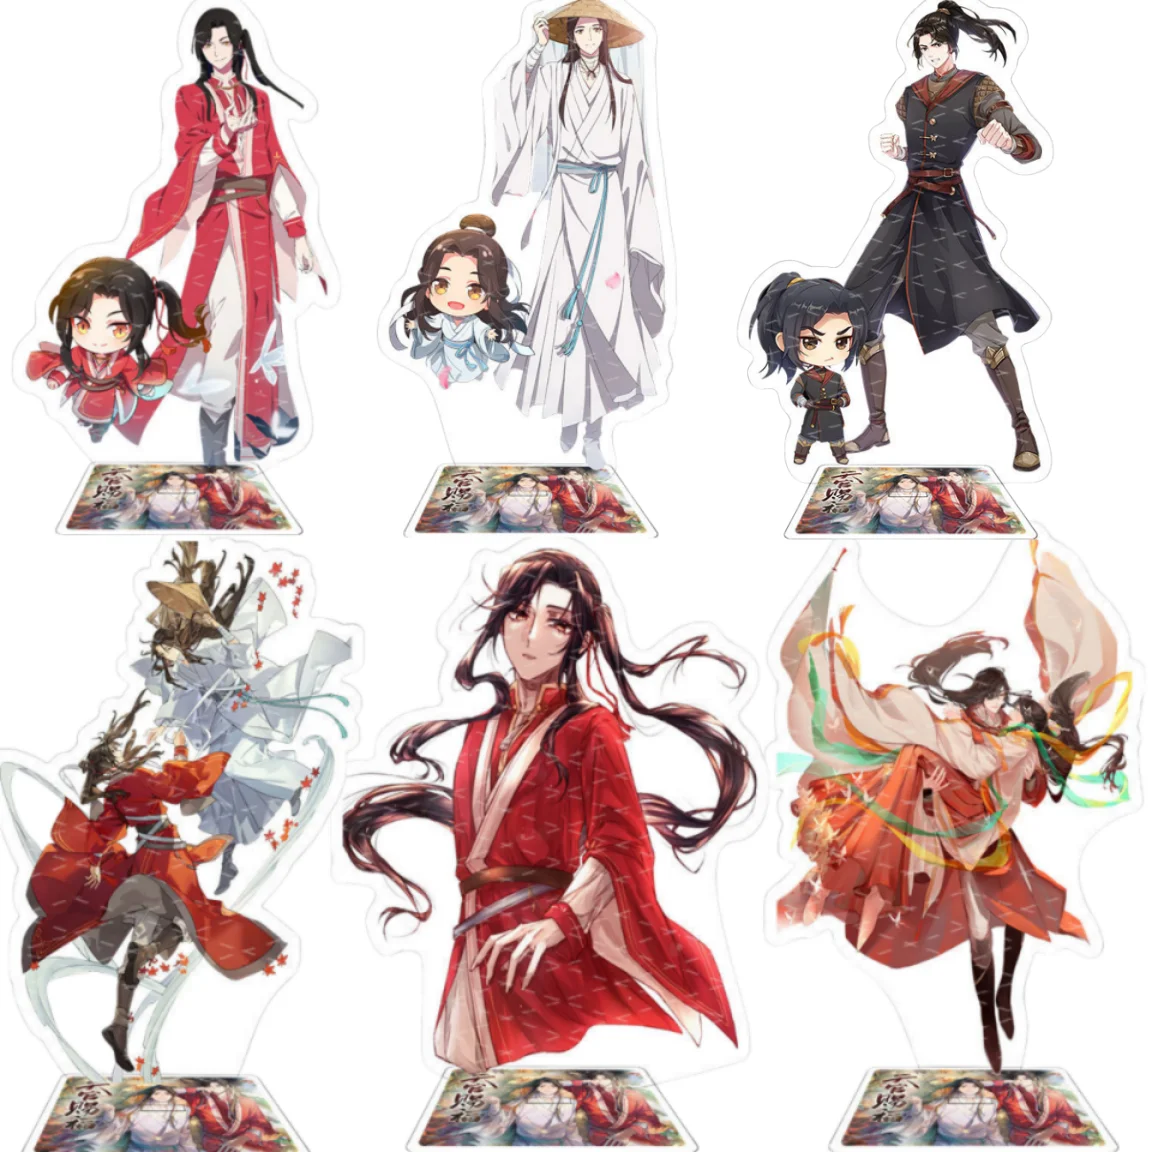 Hot Anime Heavenly God Blesses The People Tian Guan Ci Fu Xie Lian Hua Cheng Acrylic Stand Model Cartoon Figures Fans Gifts 15cm 9cm anime haikyuu acrylic figures models desk manga stand toy action figures activity desk decor ornaments gift collection